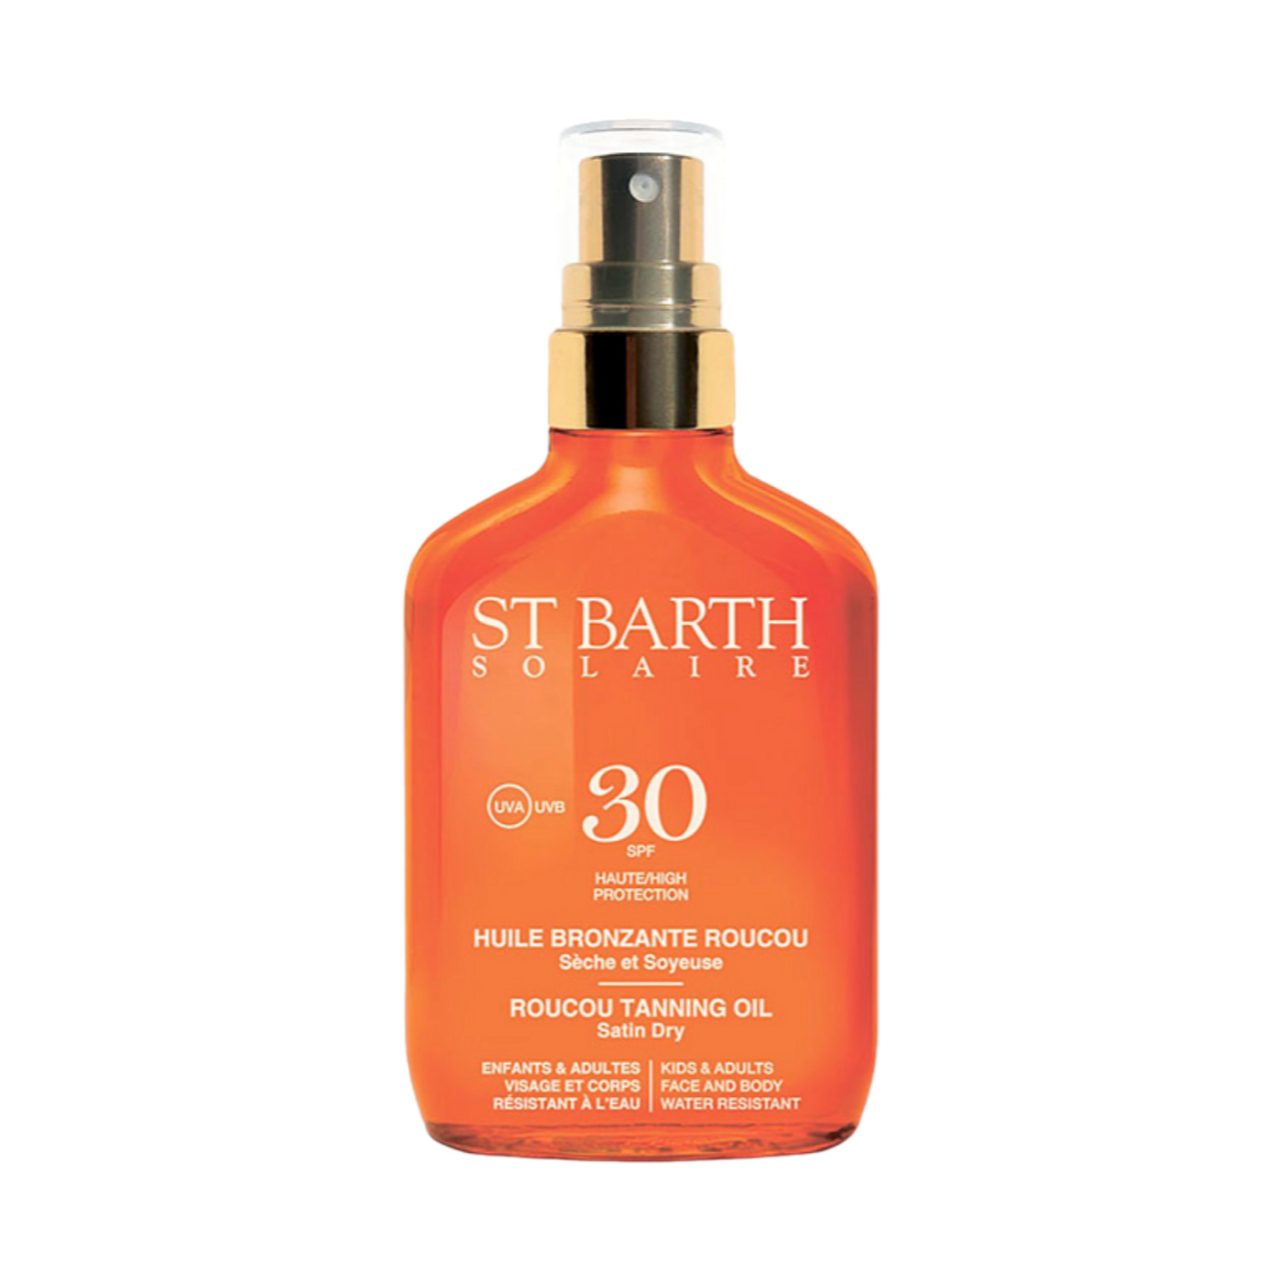 ST BARTH ROUCOU TANNING OIL